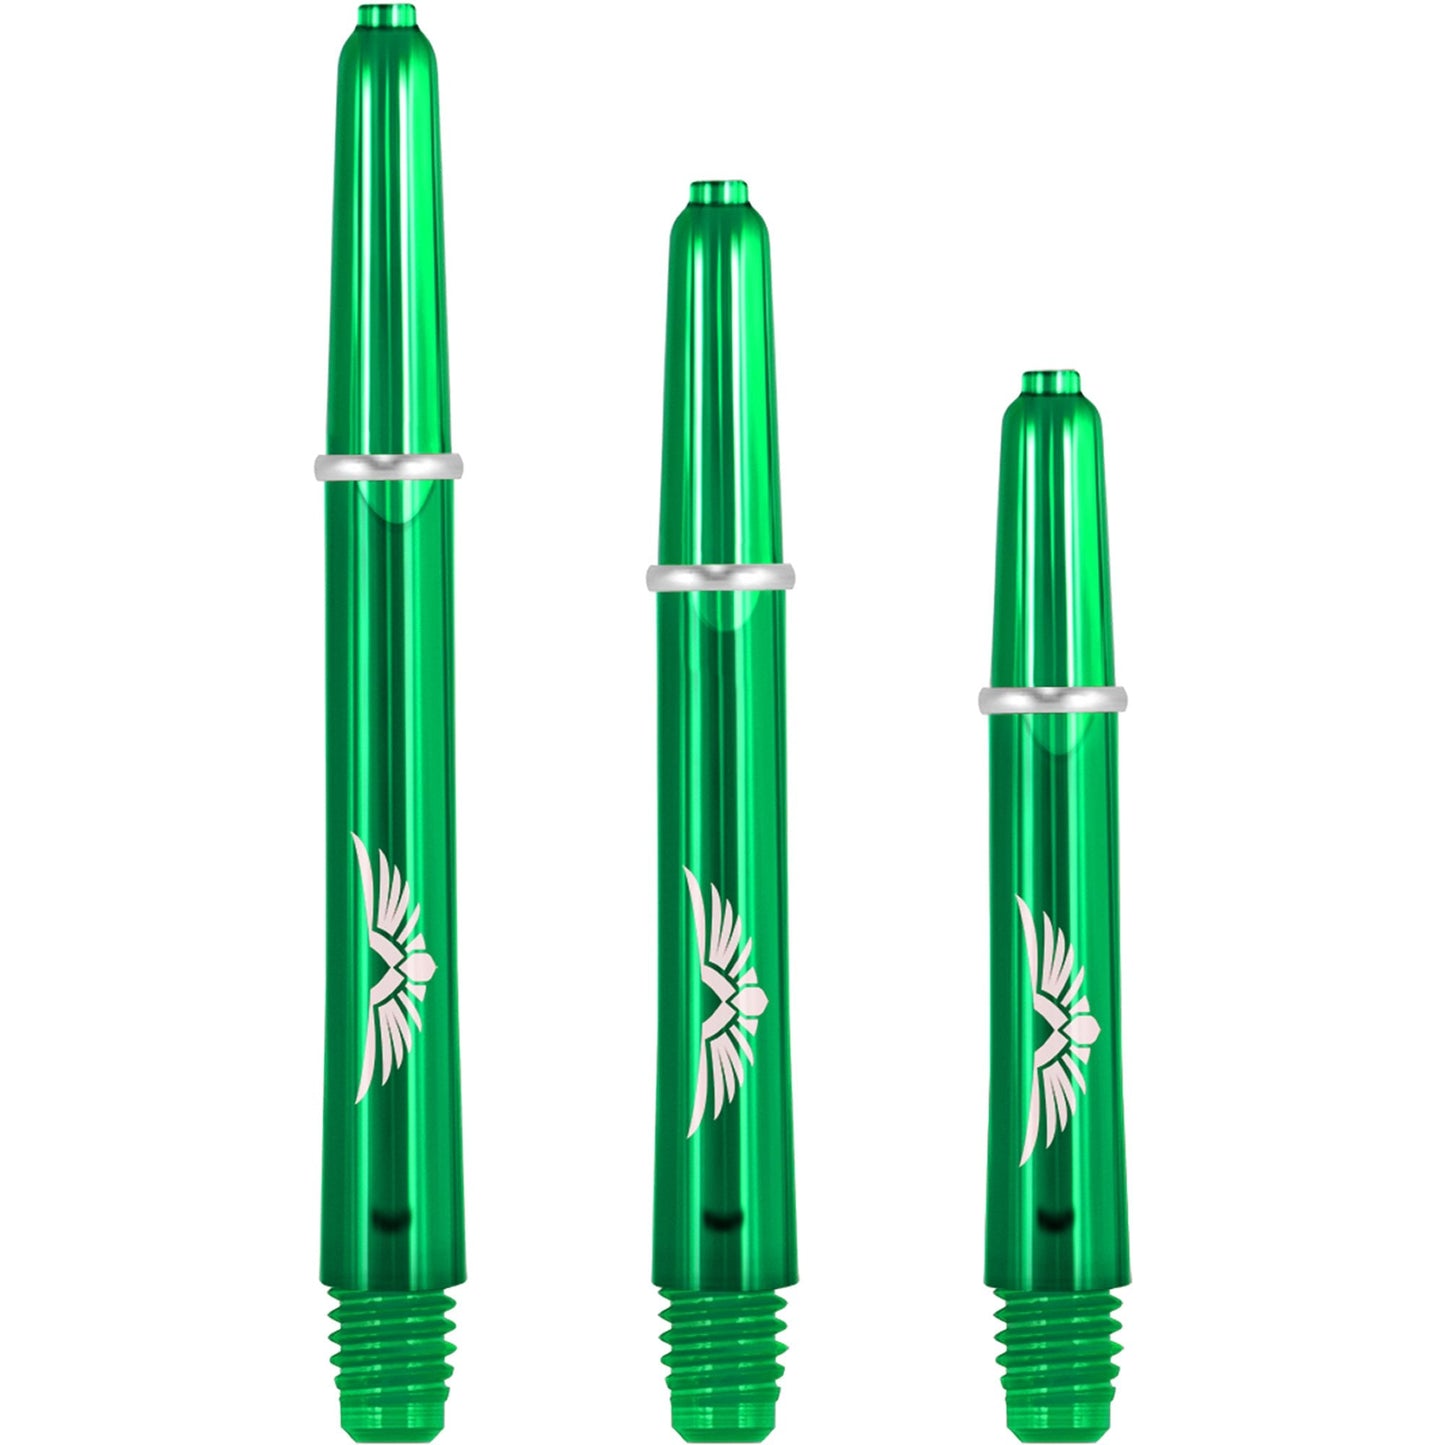 Shot Eagle Claw Dart Shafts - with Machined Rings - Strong Polycarbonate Stems - Green